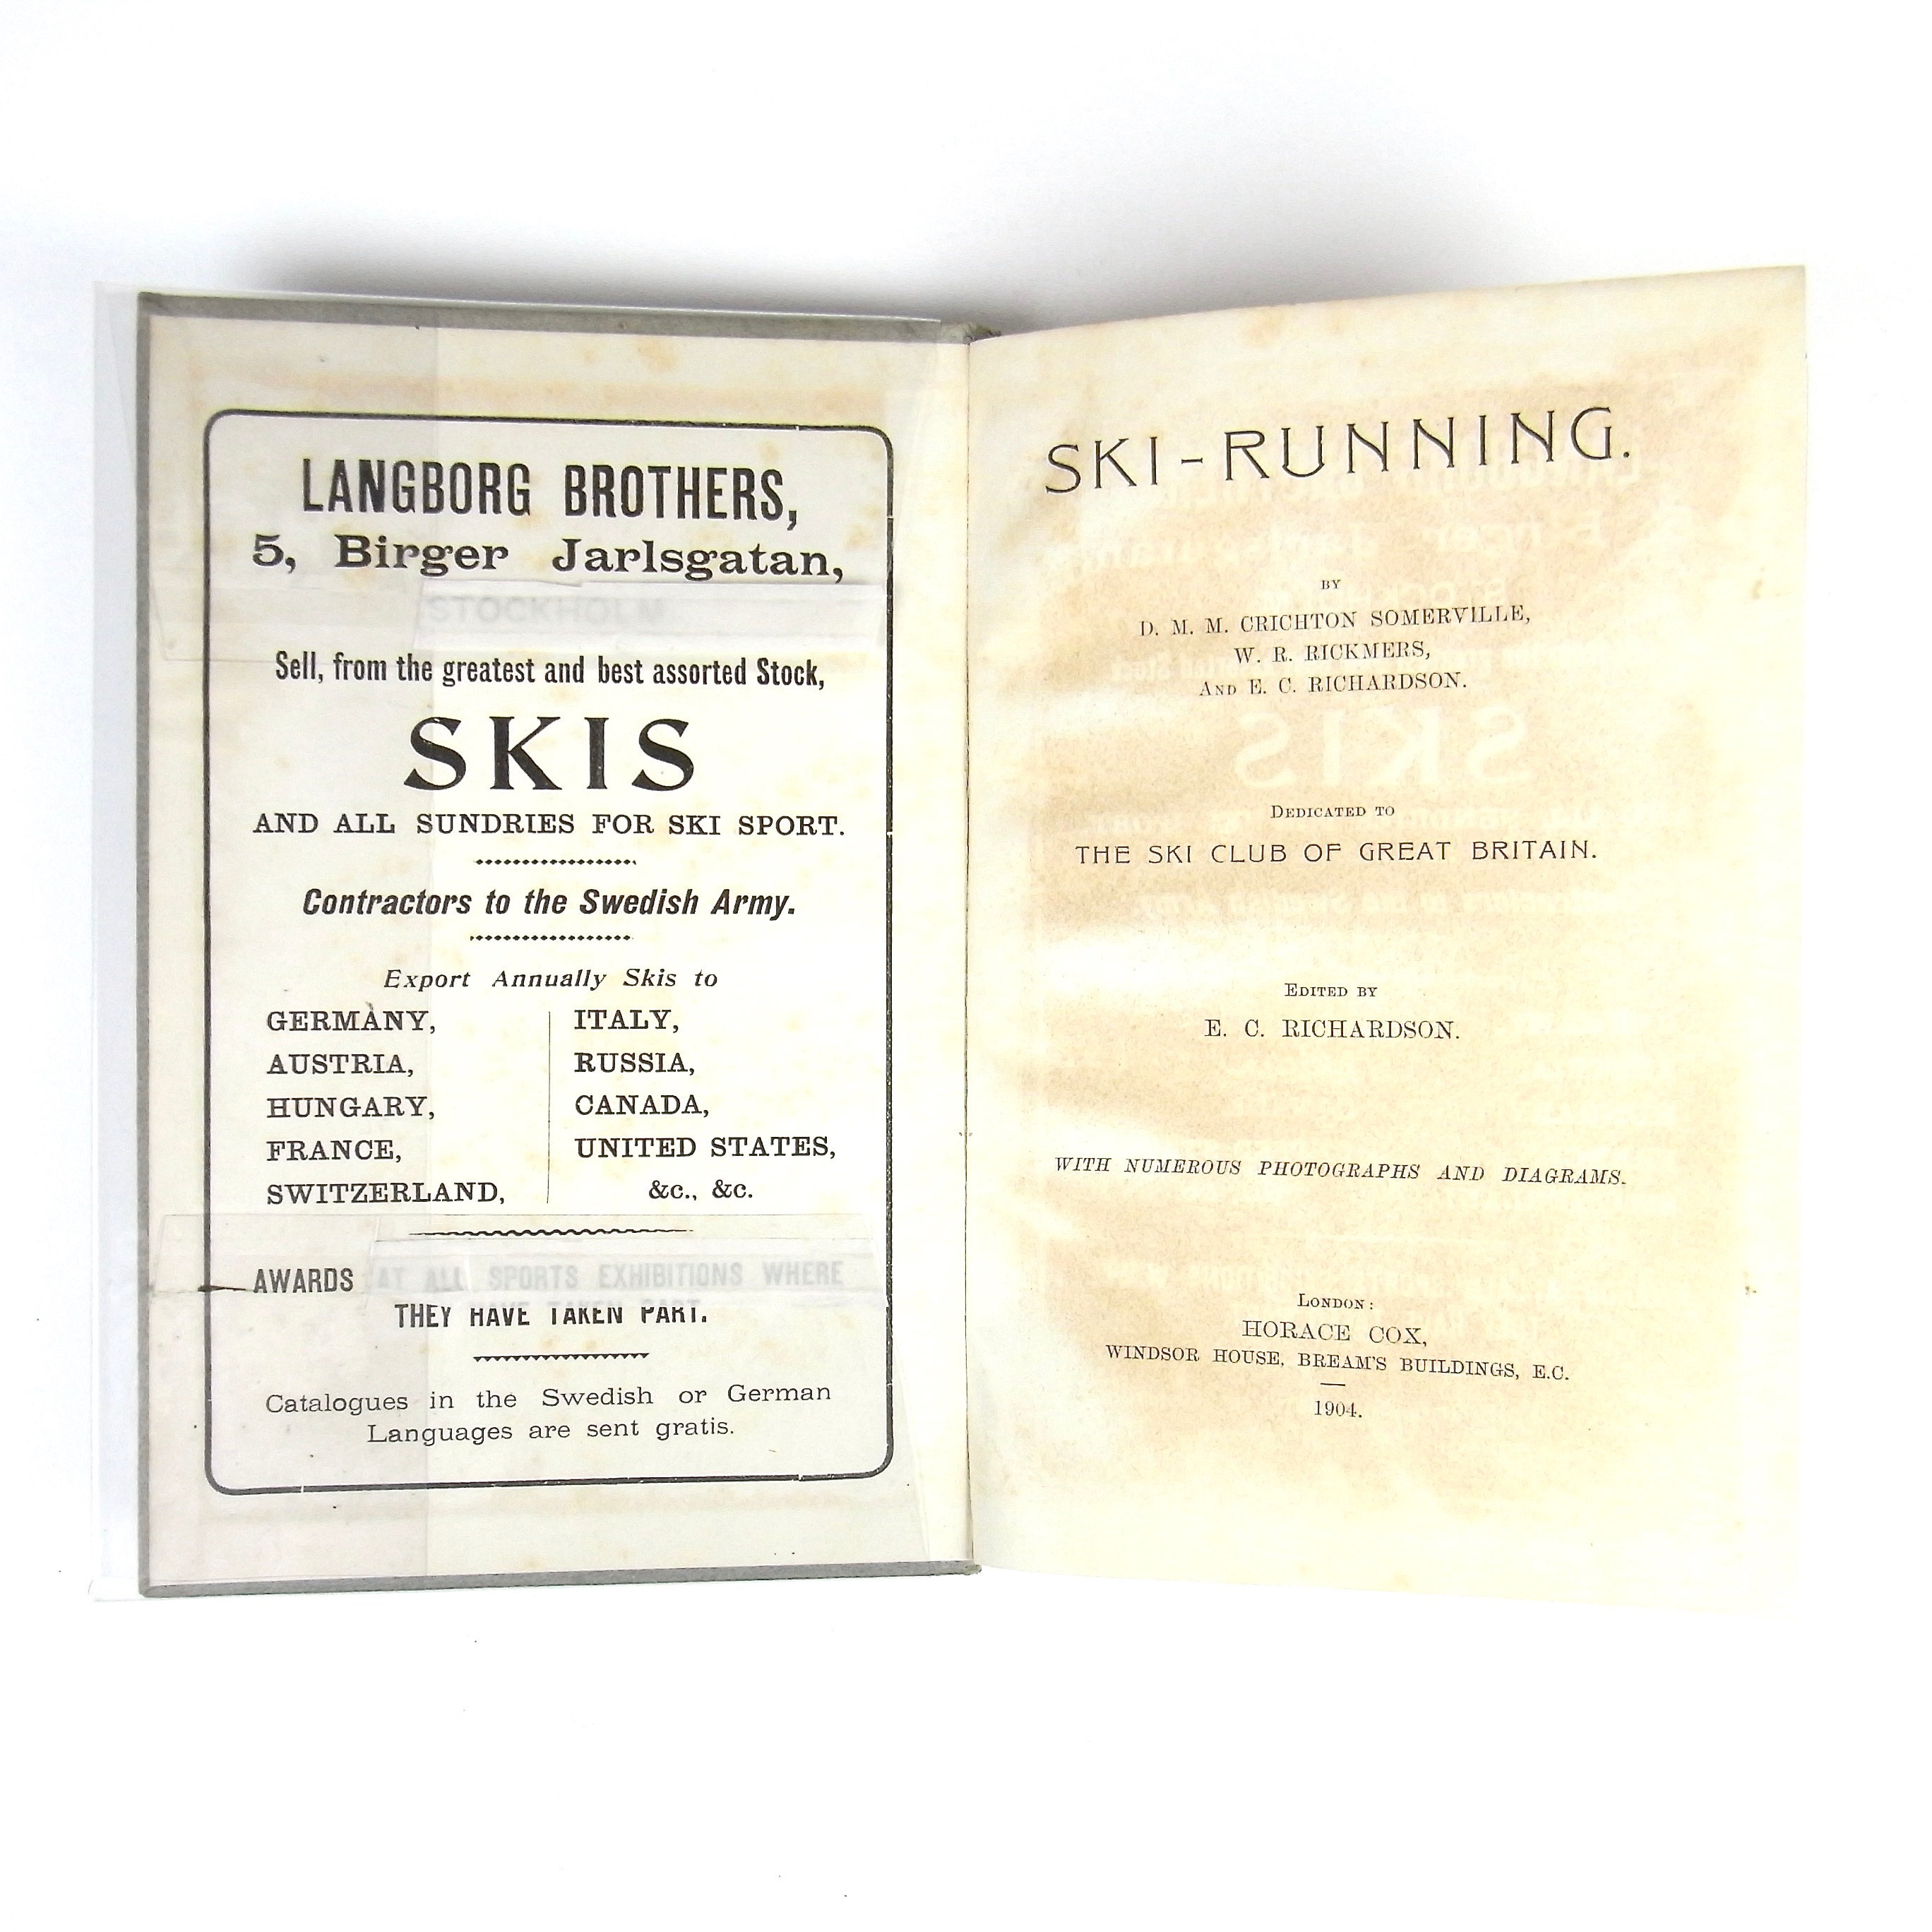 Book: Ski-Running - Dedicated to The Ski Club Of Great Britain, First Edition, 1904 - Image 2 of 2